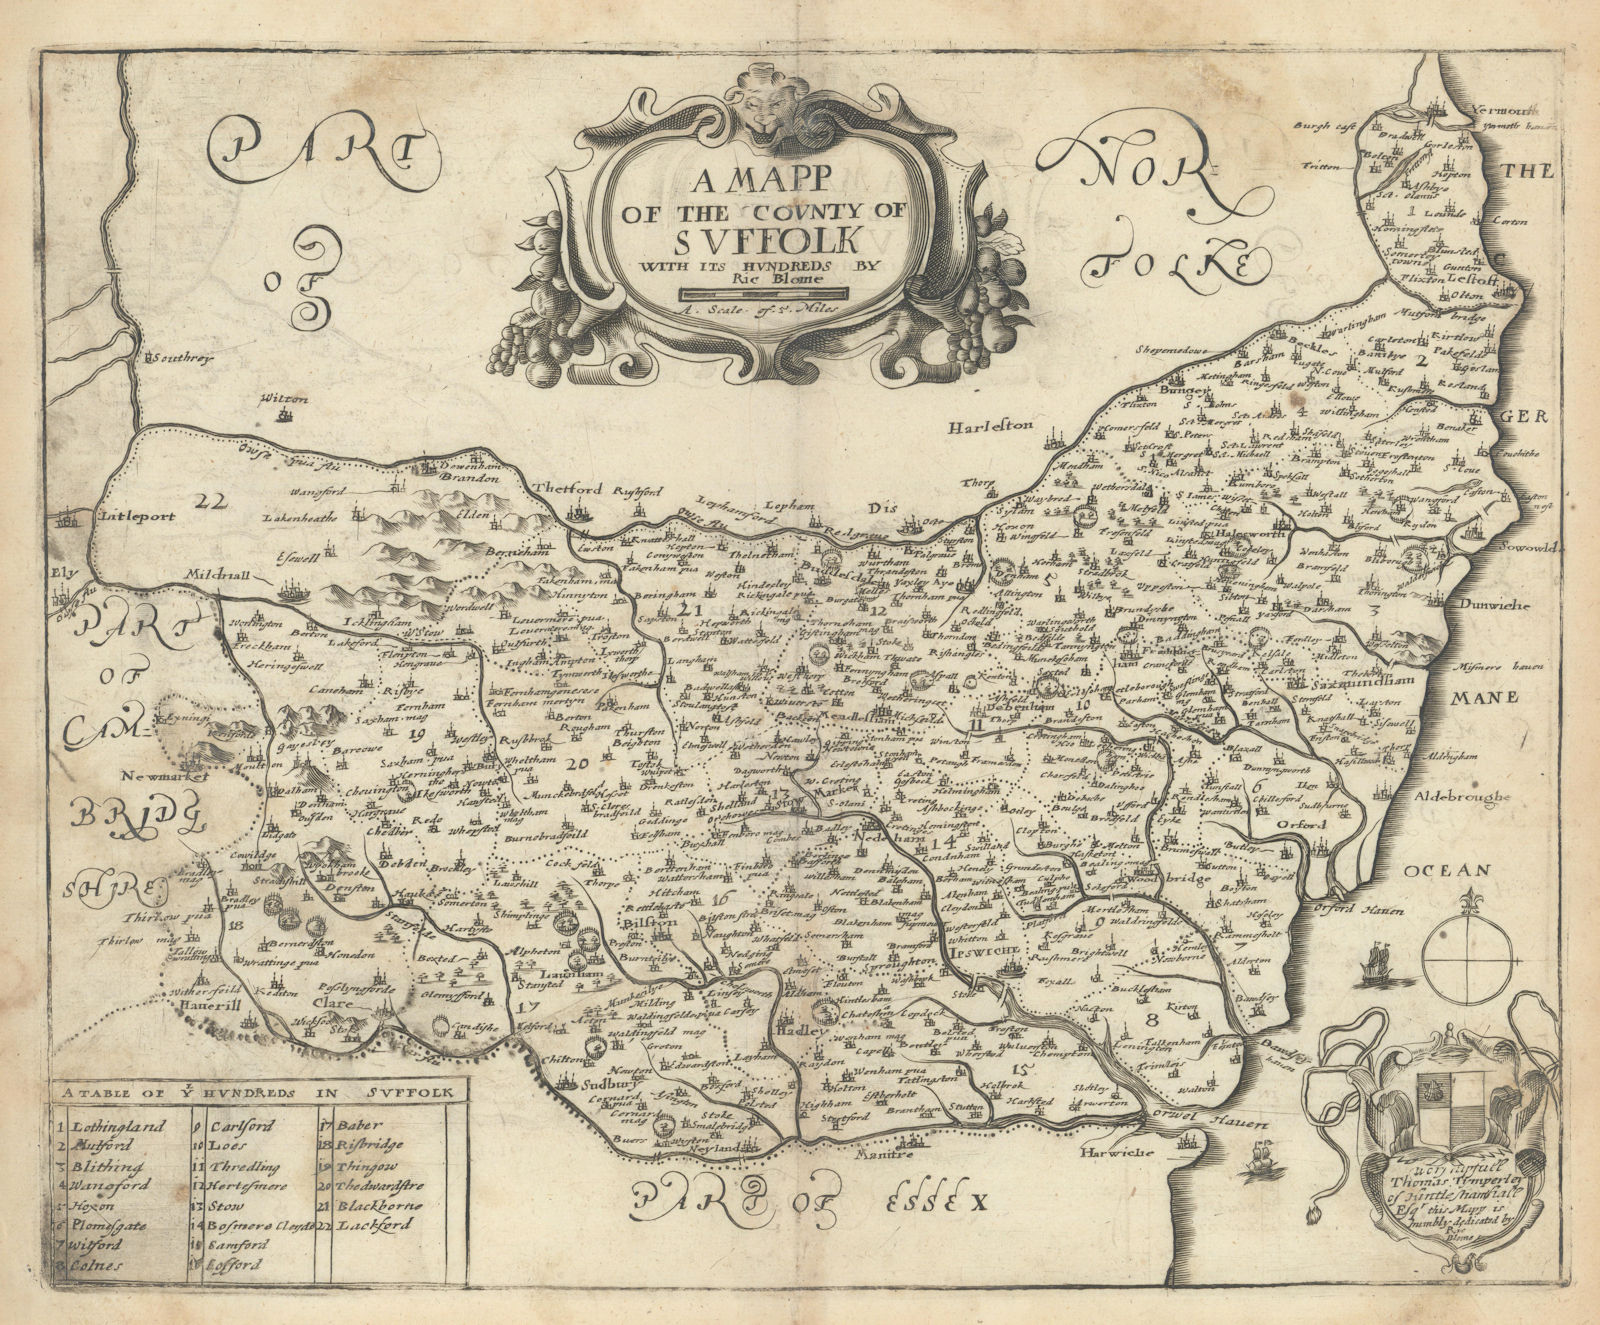 A mapp of the County of Suffolk with its Hundreds by Richard Blome 1673